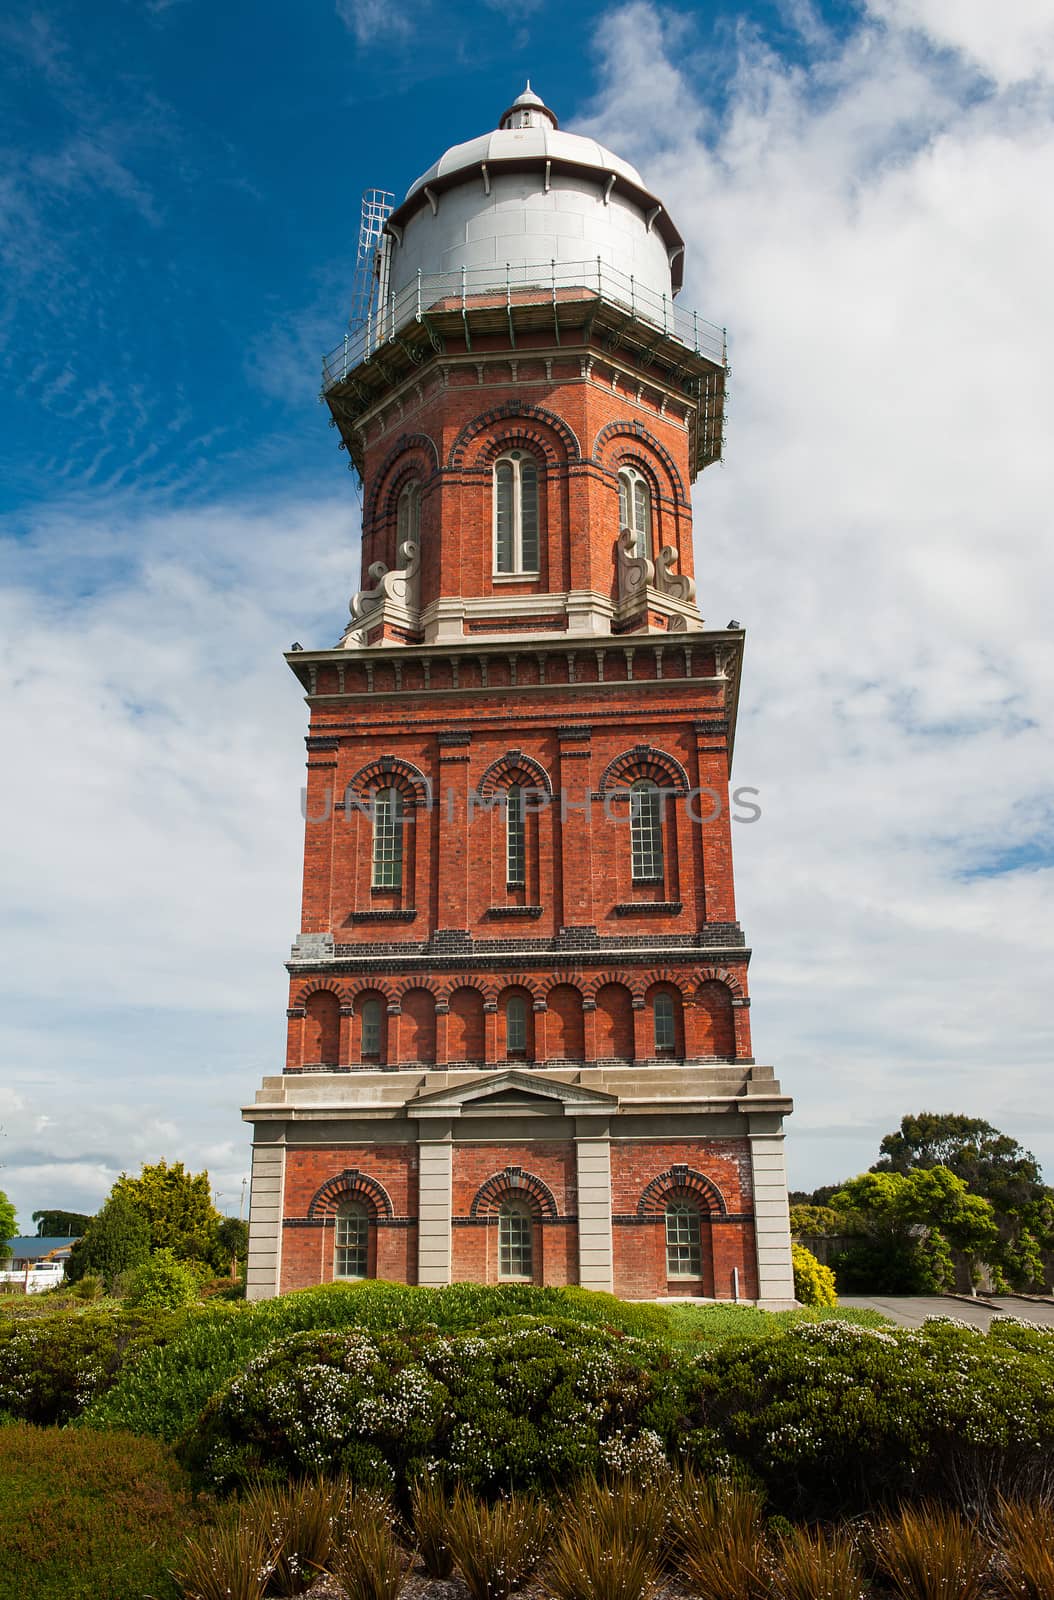 Historical Water Tower in Invercargill, the southernmost city of New Zealand and centre of Southland region